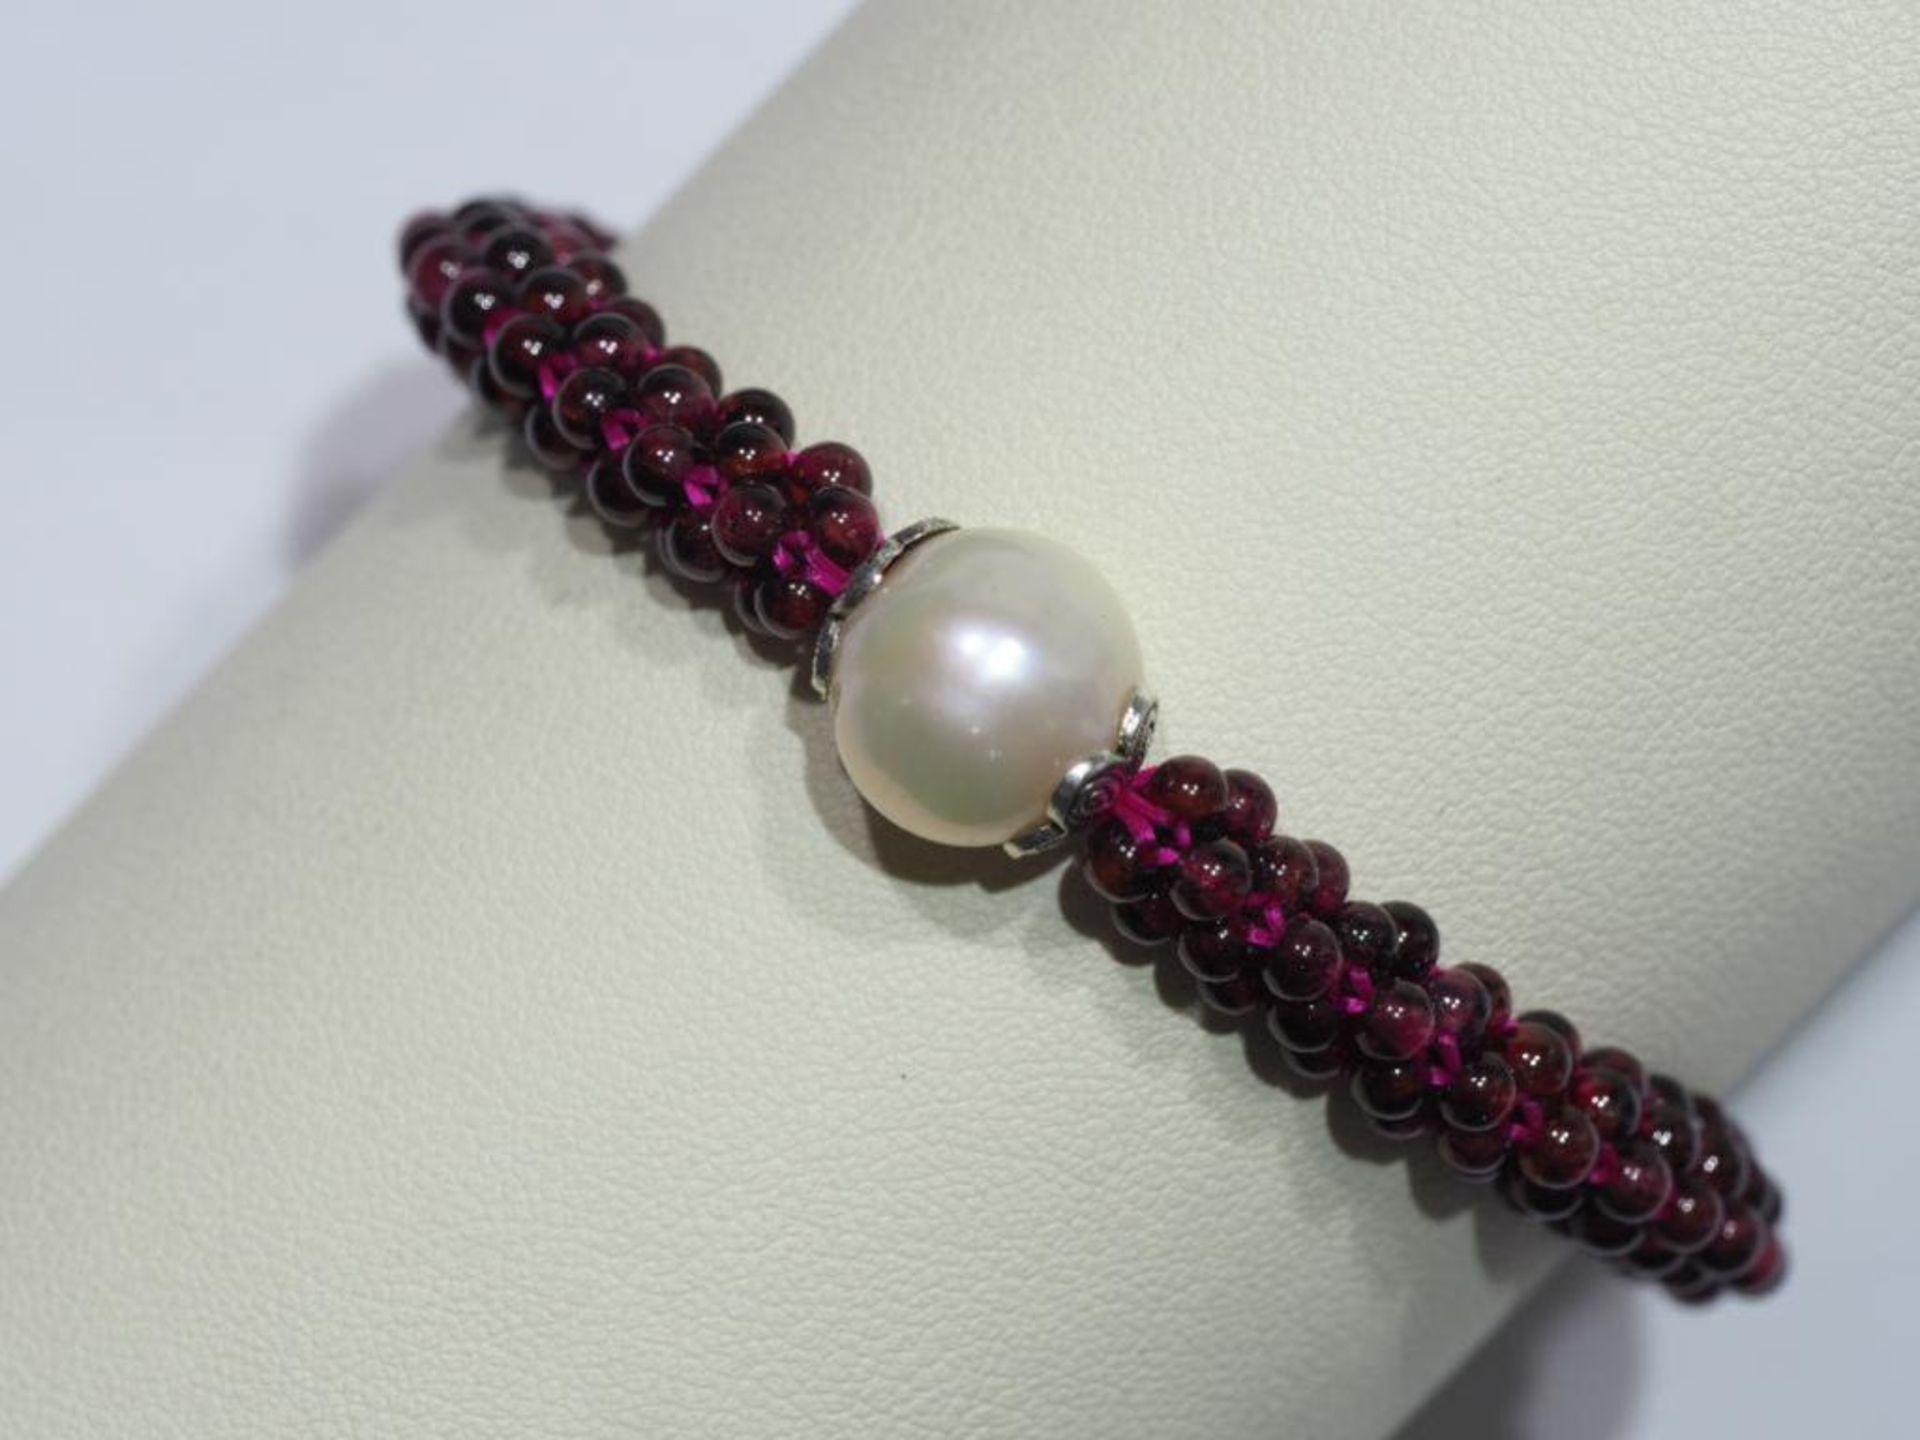 Genuine Garnet (January Birthstone) and Cultured Pearl Flexible Size Bracelet Appraised $465 - Image 3 of 4